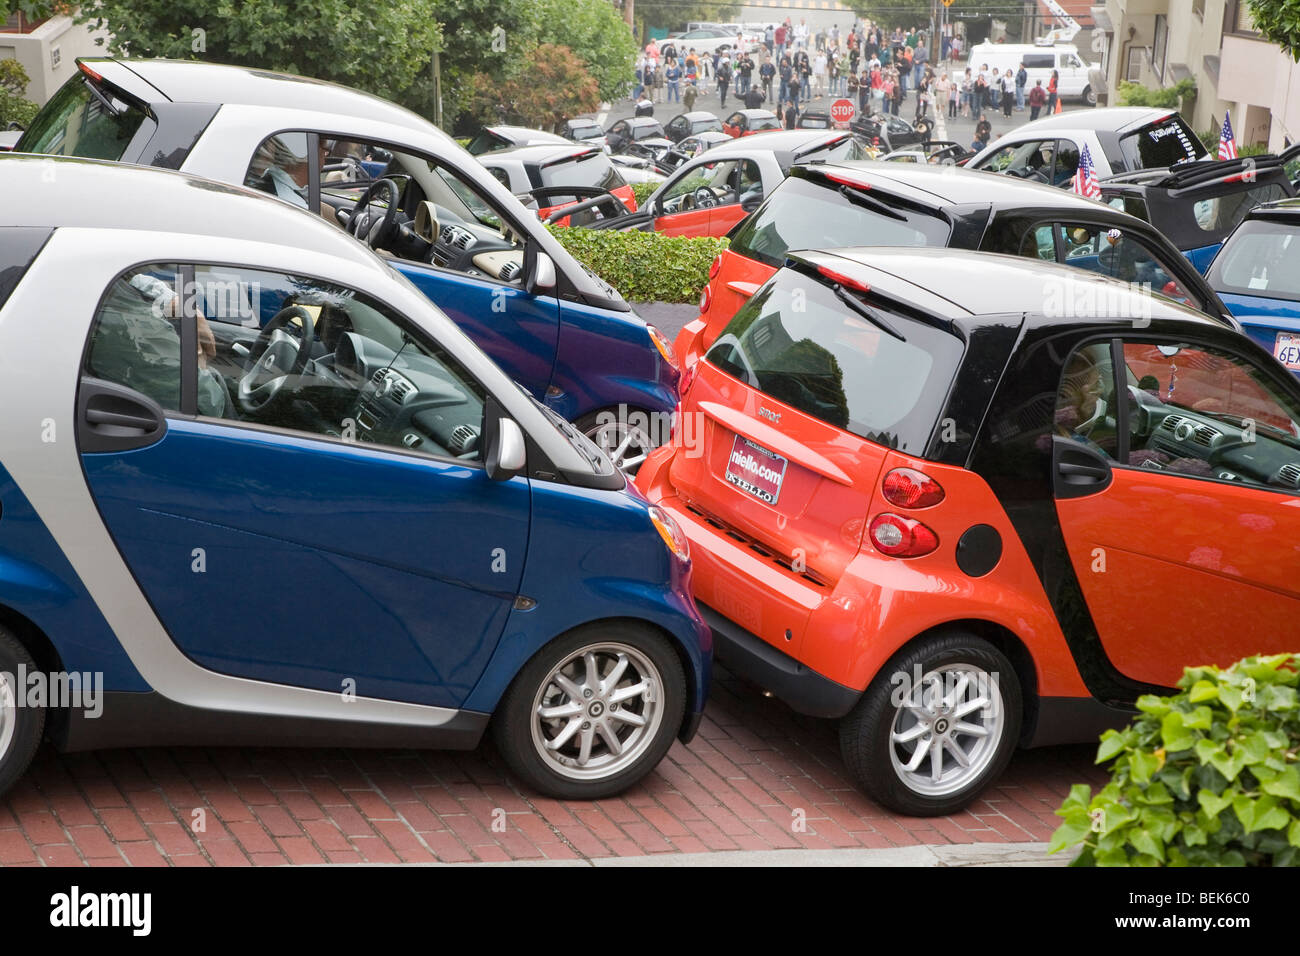 Smart Car enthusiasts packed approximately 130 of their compact cars into Lombard Street for photo shoot during car club rally. Stock Photo